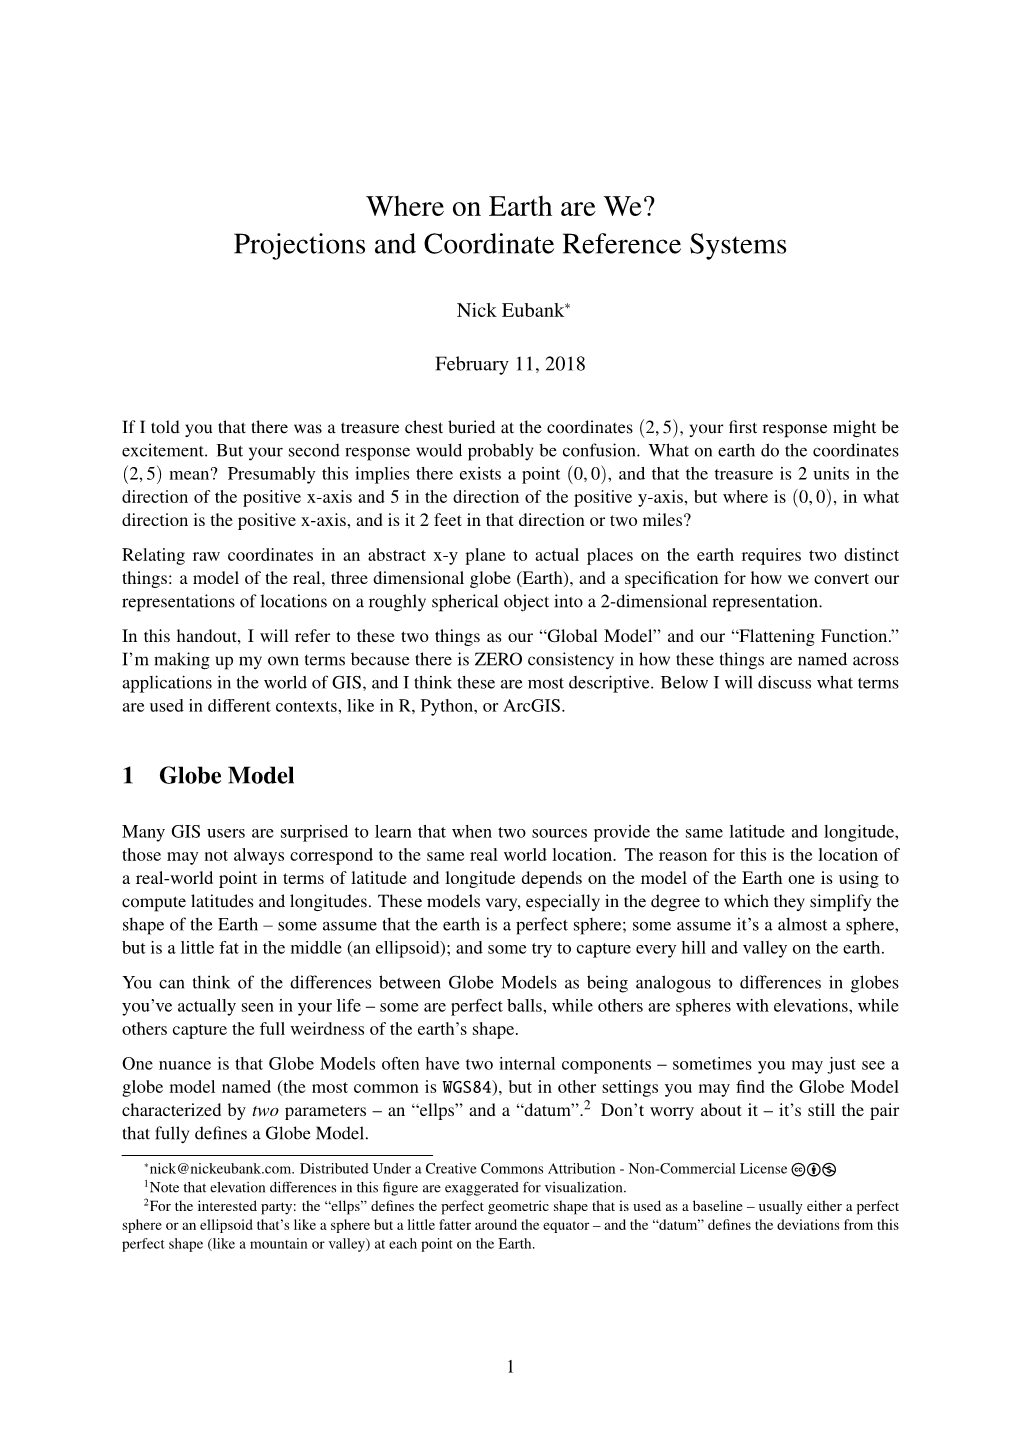 Projections and Coordinate Reference Systems